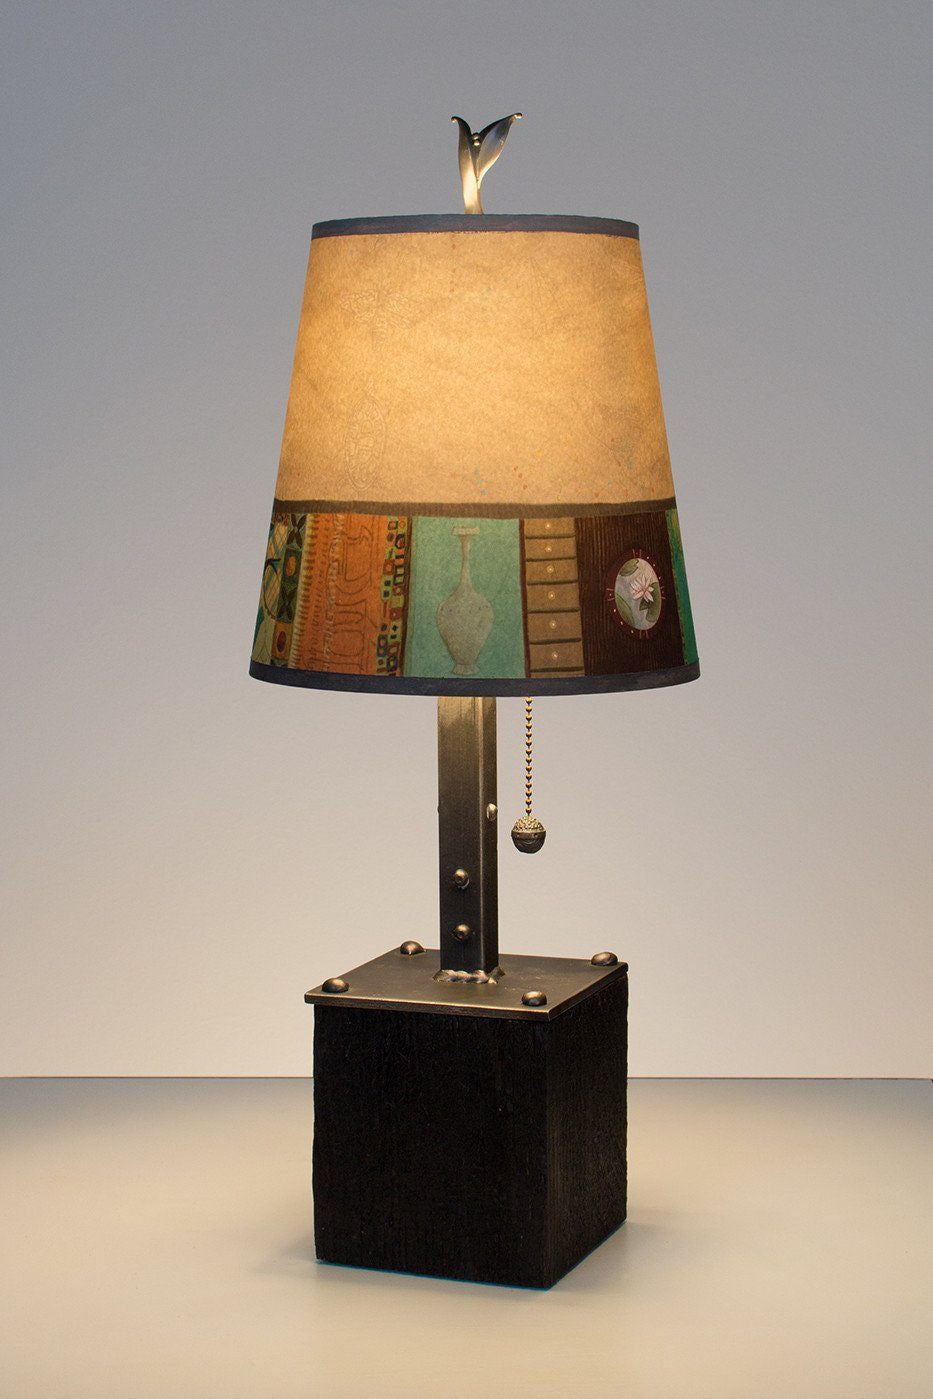 Janna Ugone &amp; Co Table Lamps Steel Table Lamp on Reclaimed Wood with Small Drum Shade in Linen Match